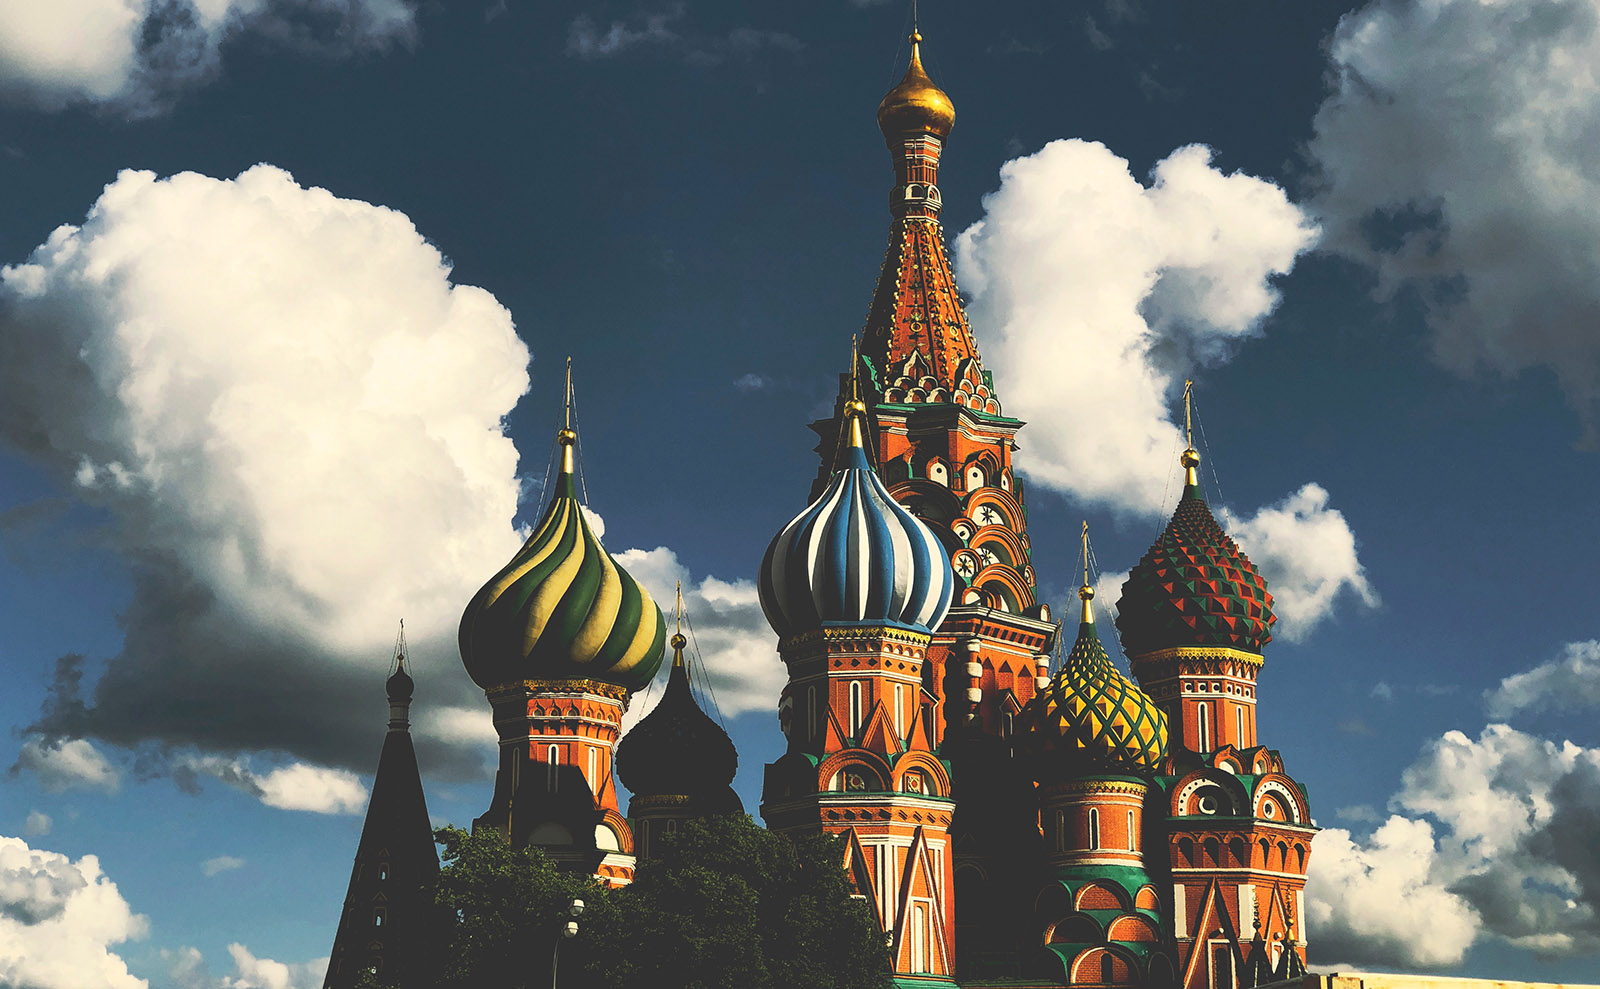 st. basil's cathedral in red square, moscow.